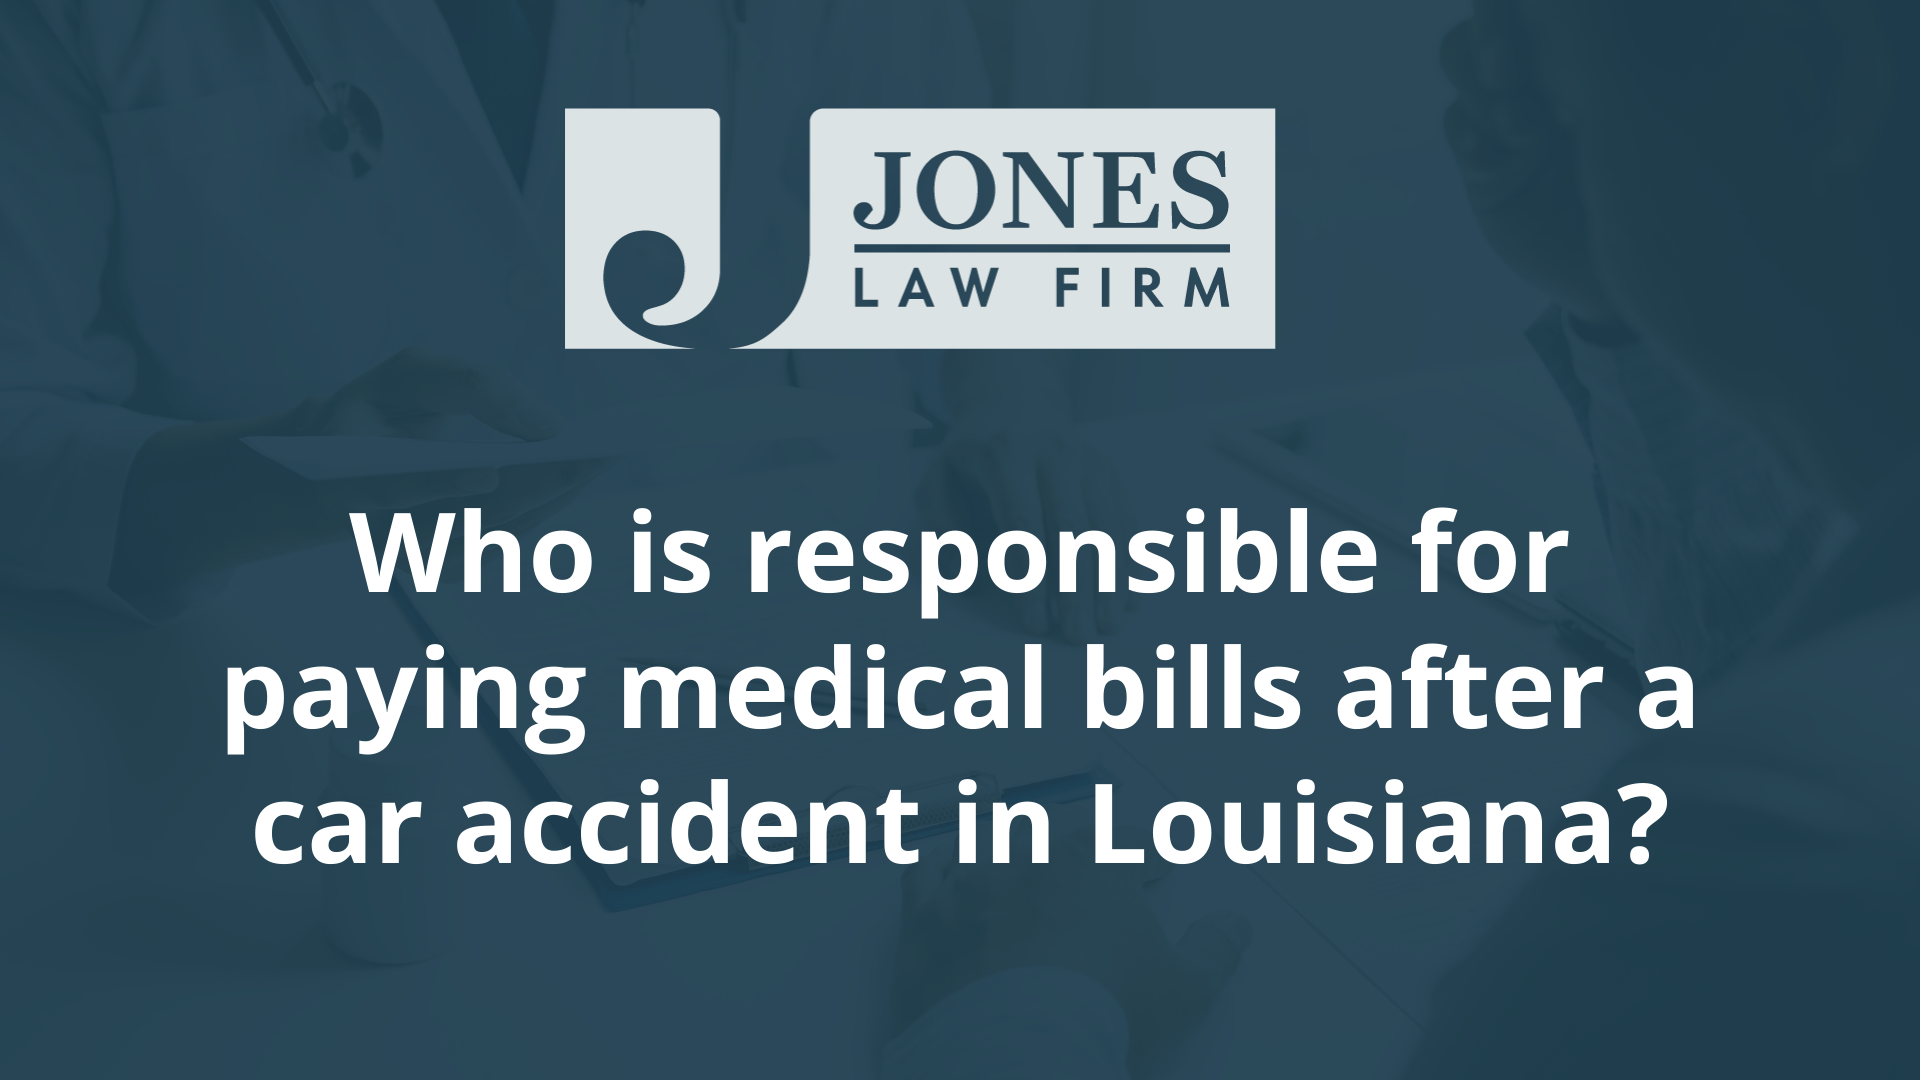 Who is responsible for paying medical bills after a car accident in Louisiana - jones law firm - louisiana